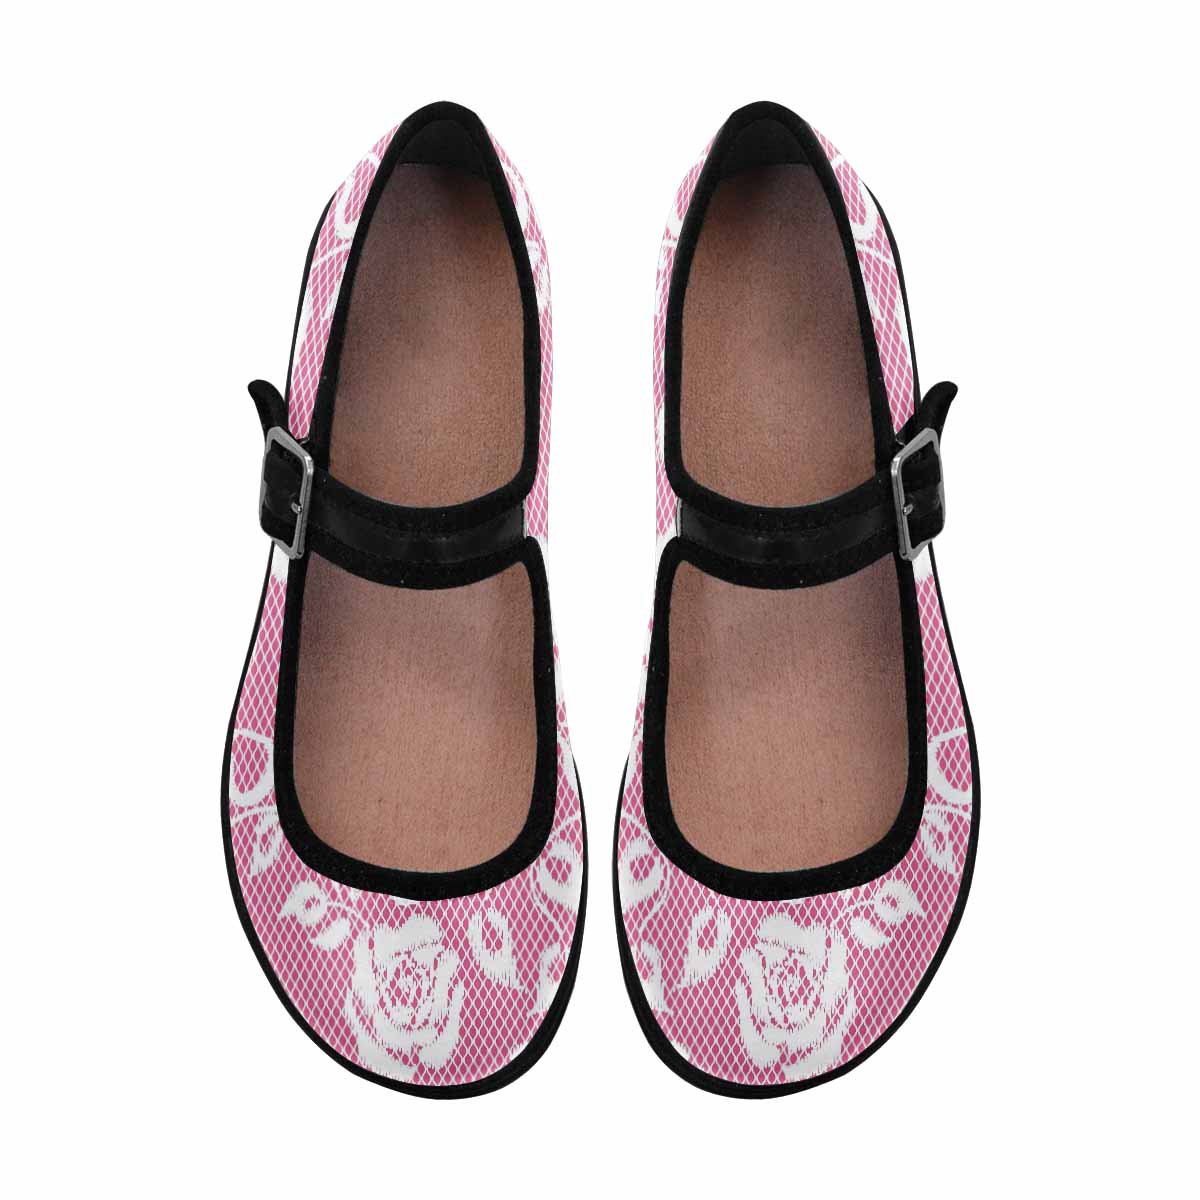 Victorian lace print, cute, vintage style women's Mary Jane shoes, design 17